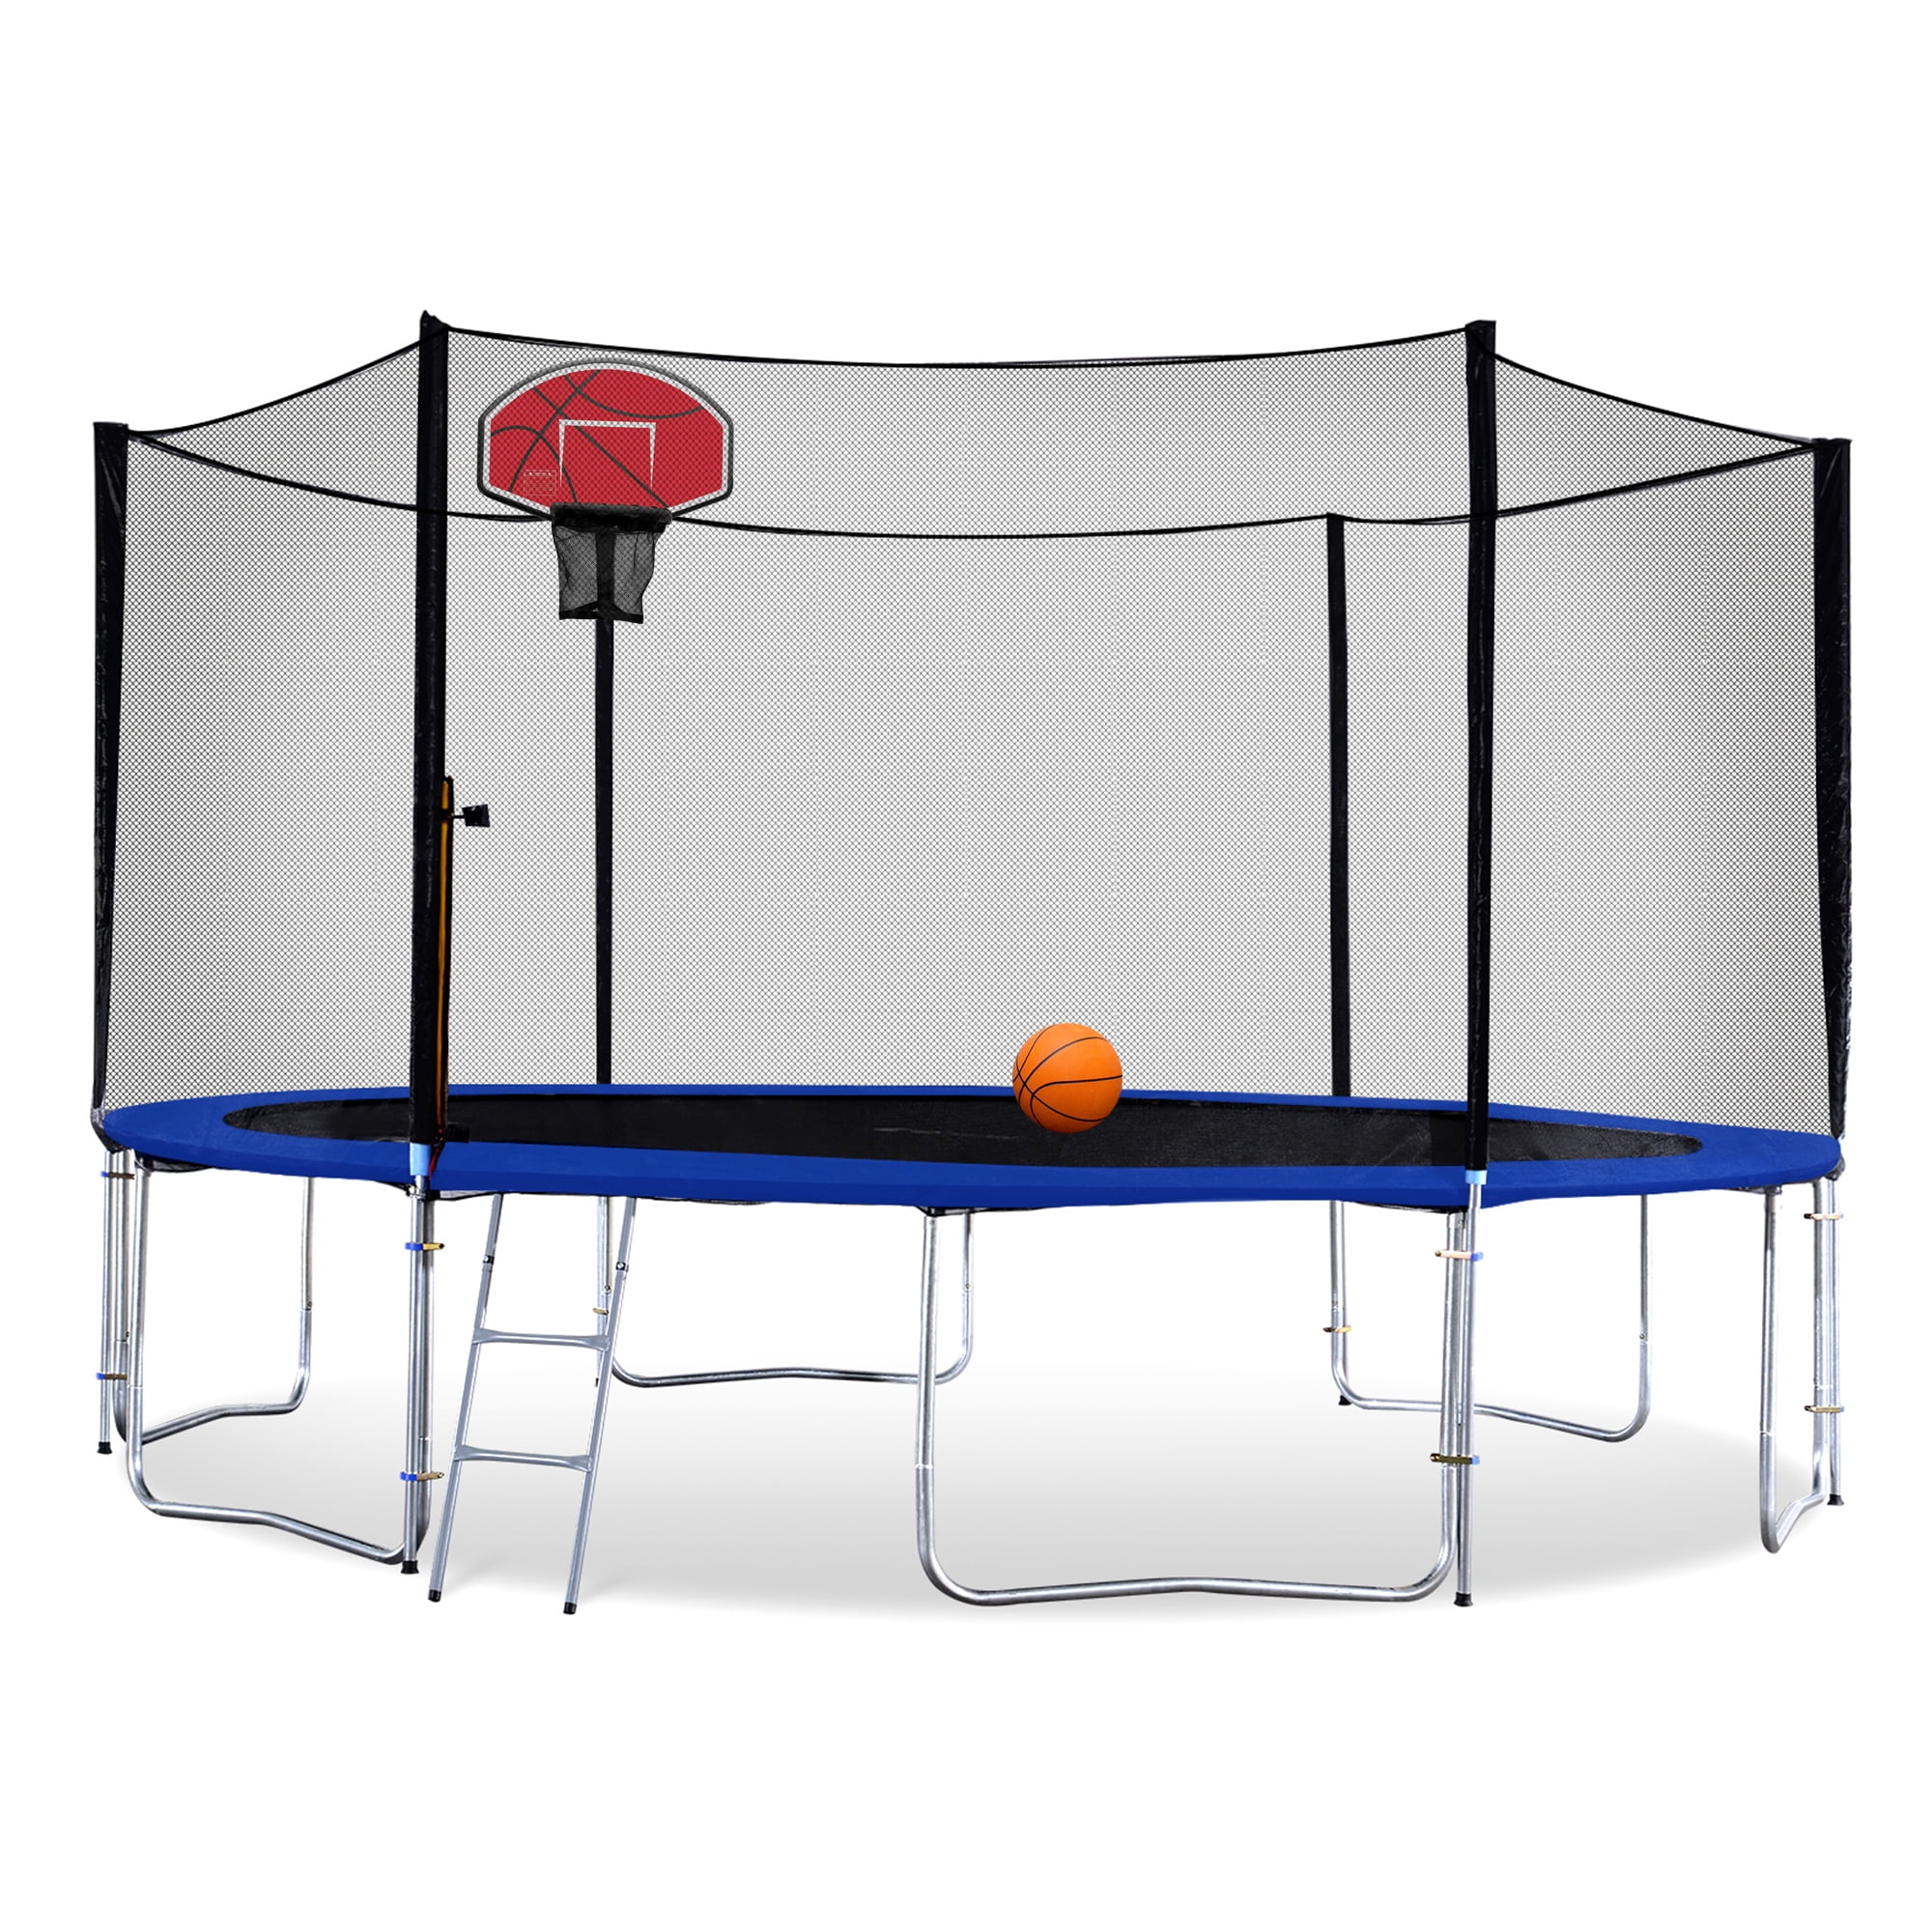 Exacme Exacme Round Trampoline with Safety Enclosure Net and Basketball Hoop